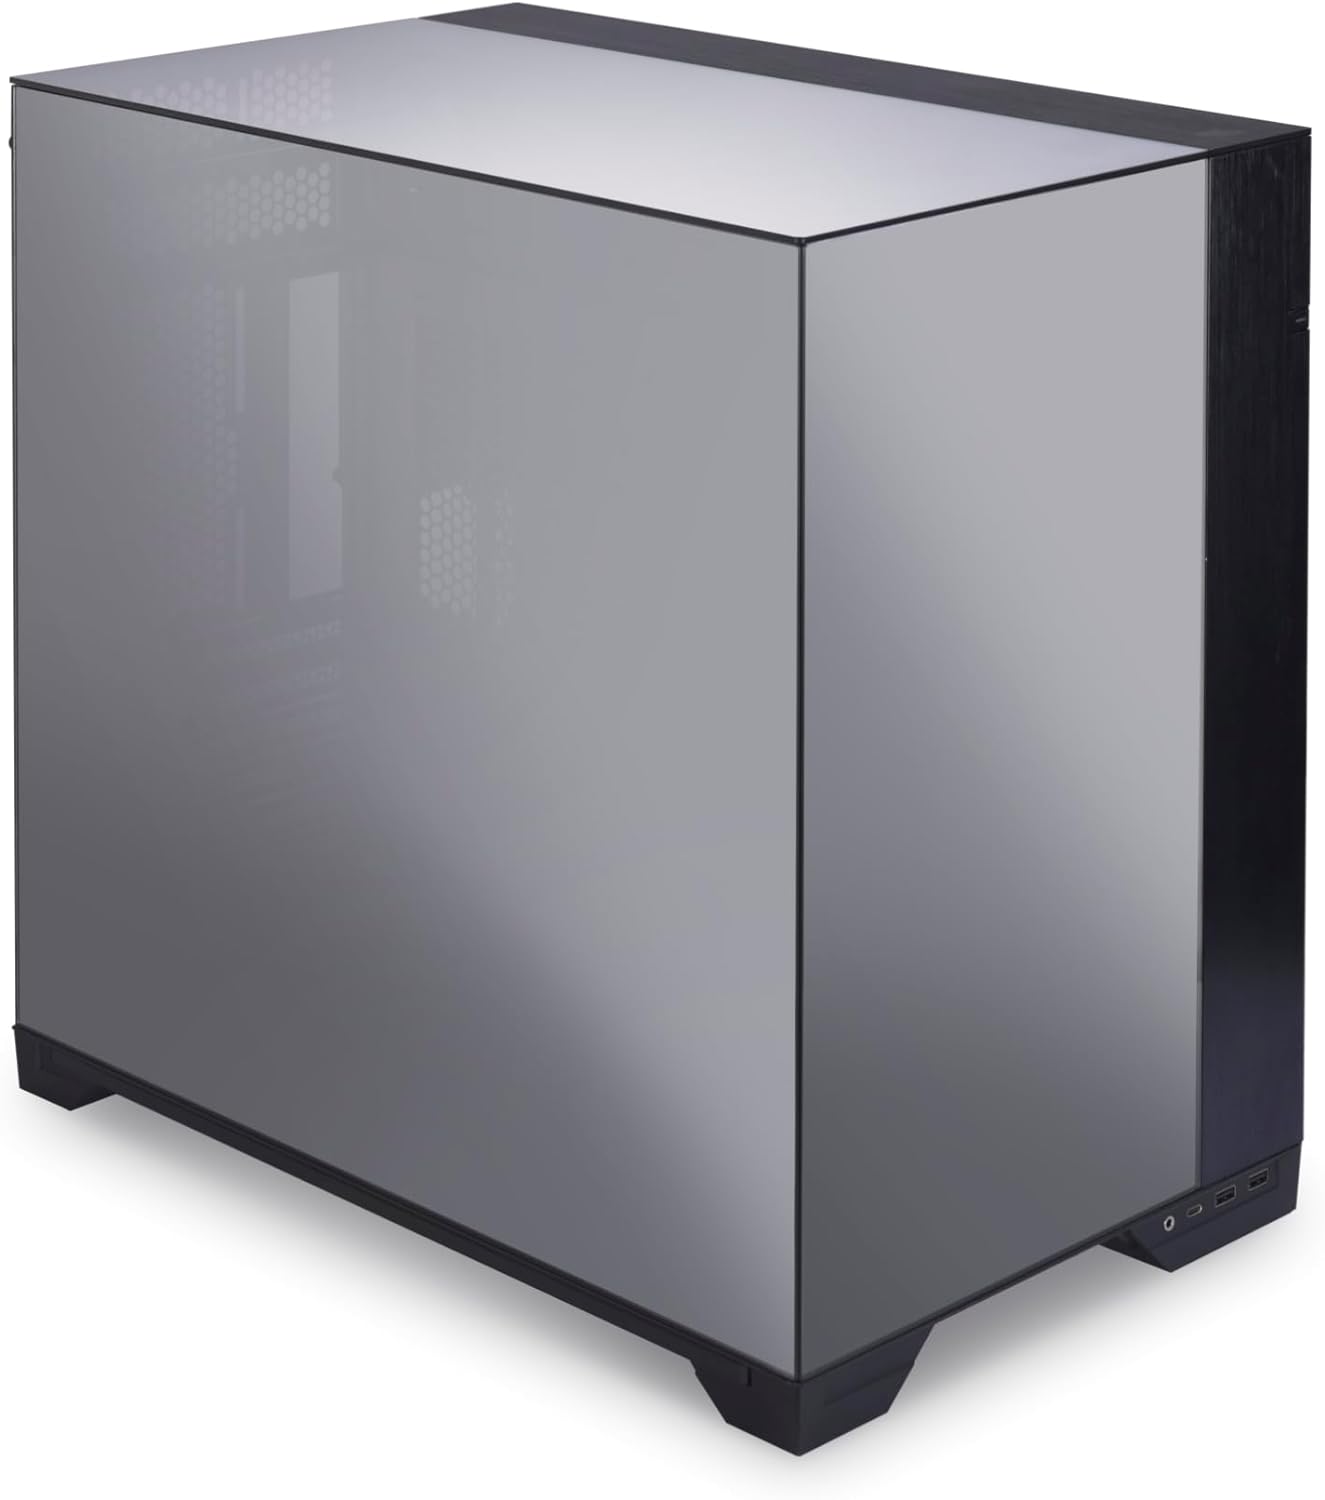 Lian Li O11 Vision -Three Sided Tempered Glass Panels  - Dual-Chamber ATX Mid Tower (Chrome) GAMING CASE